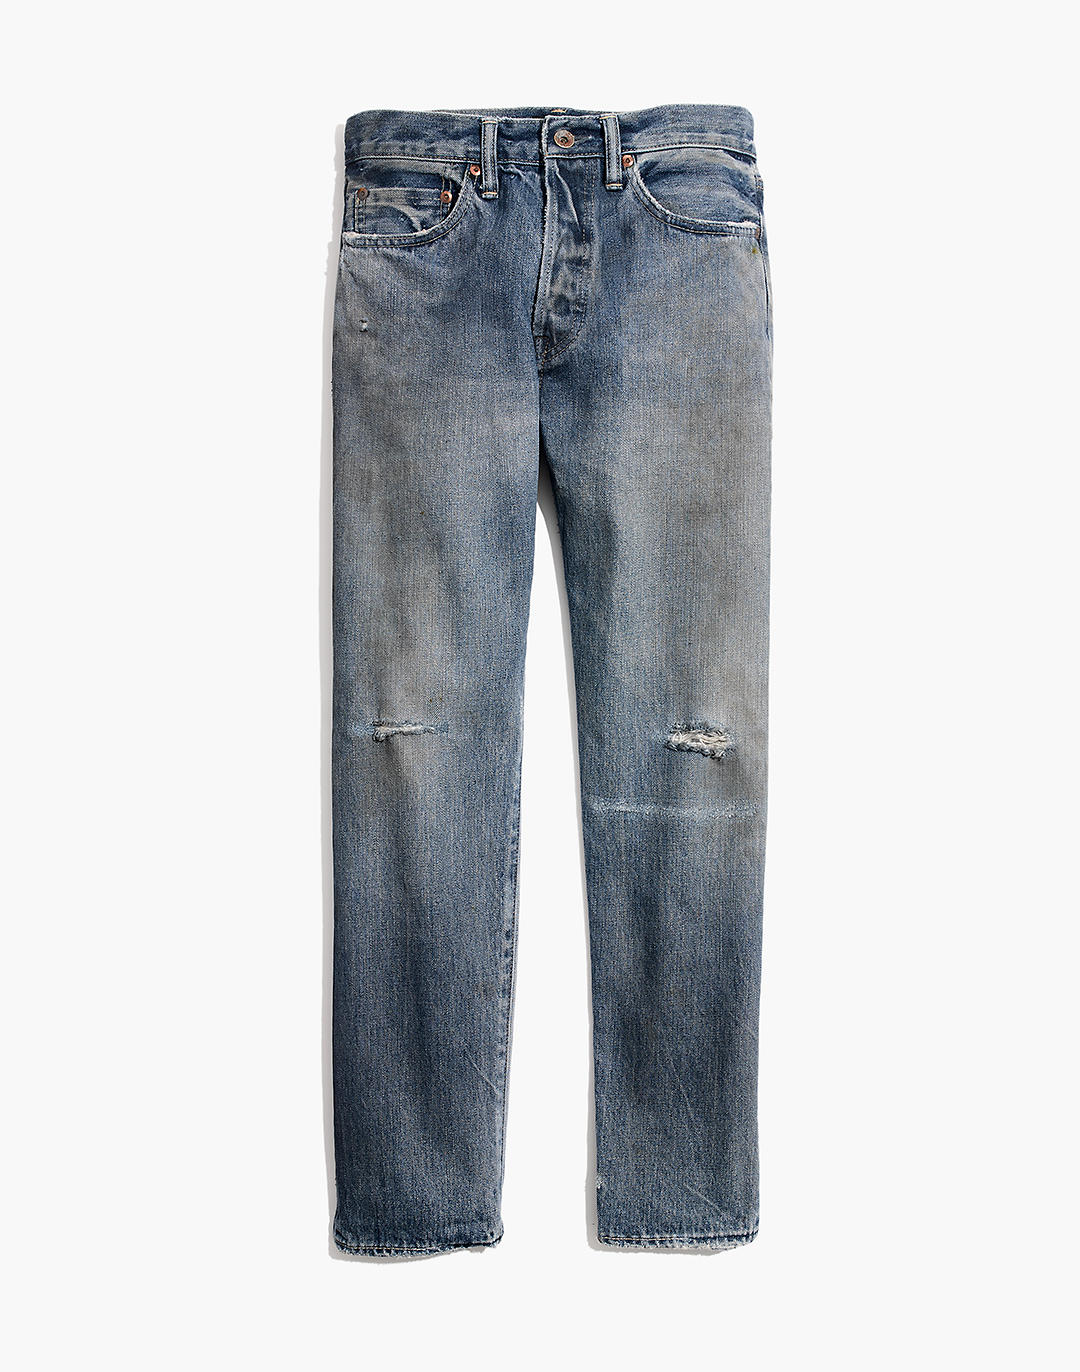 Chimala® Selvedge Narrow Tapered Cut Jeans